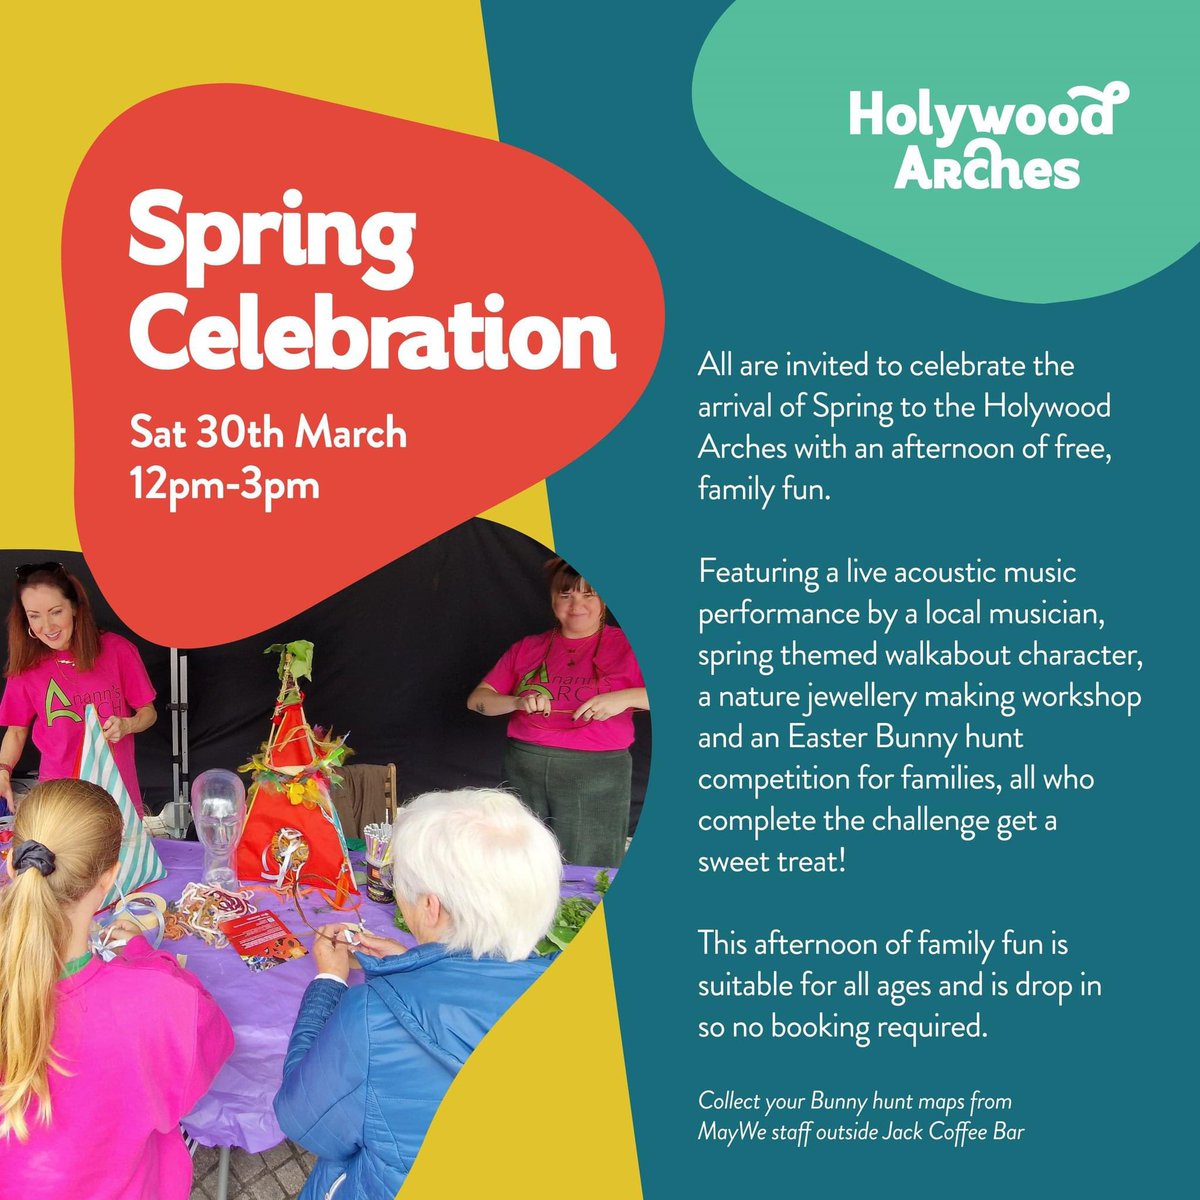 🌸SPRING CELEBRATION 🌸 Join Holywood Arches Business Association this Saturday for an afternoon of free family fun from 12pm to 3pm. There’ll be music, jewellery making, walkabout characters and an Easter Bunny Hunt 🐣